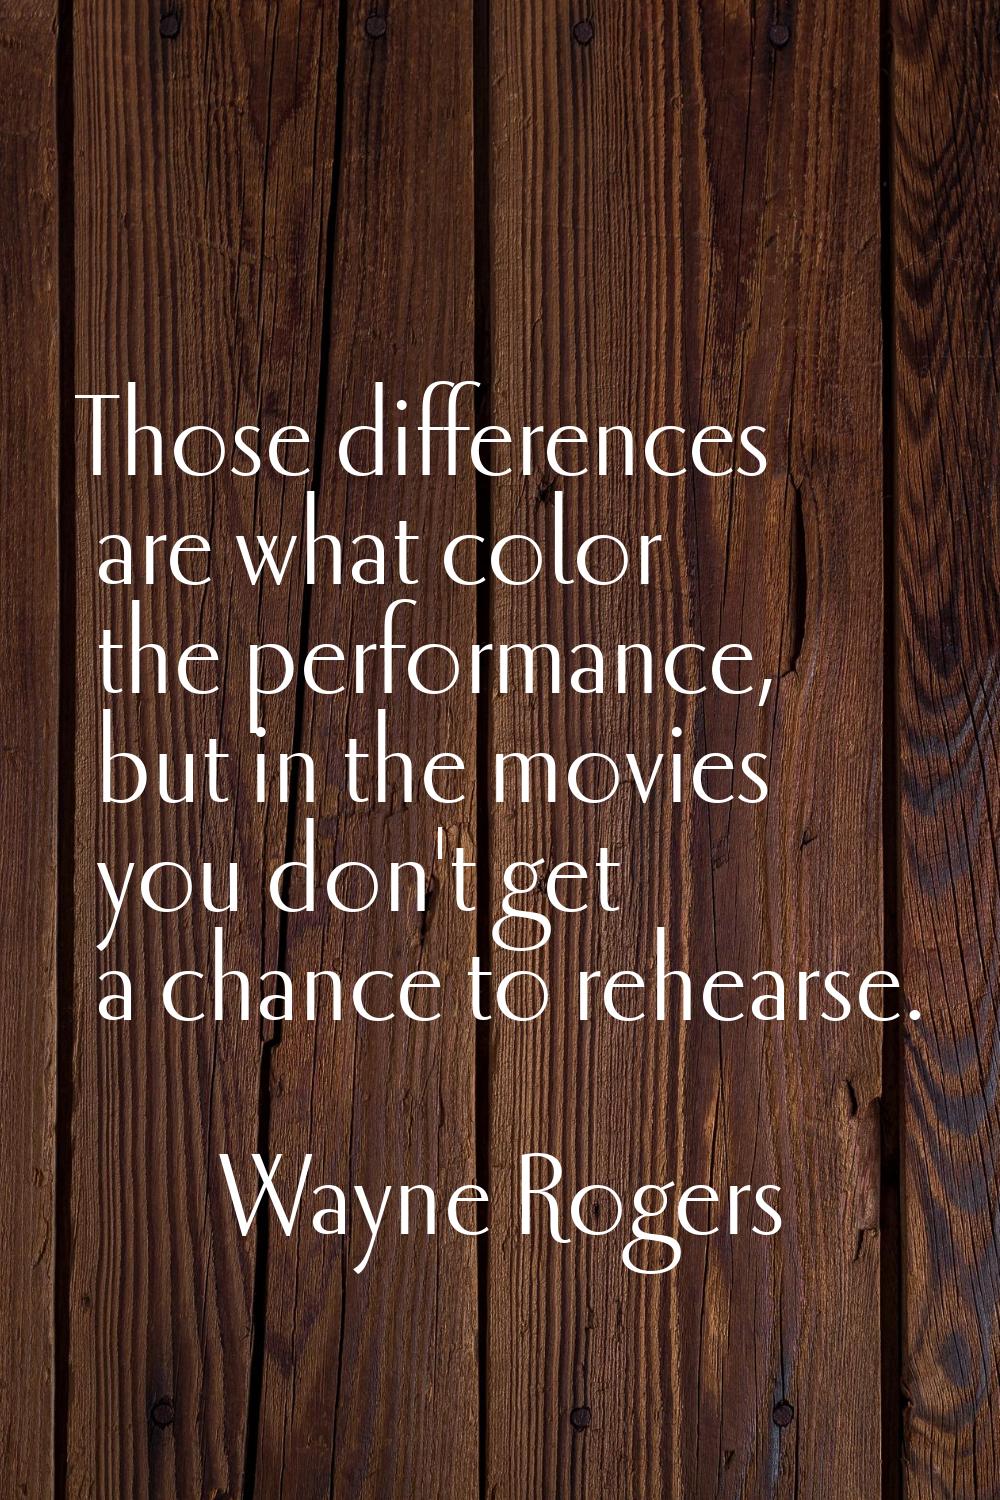 Those differences are what color the performance, but in the movies you don't get a chance to rehea